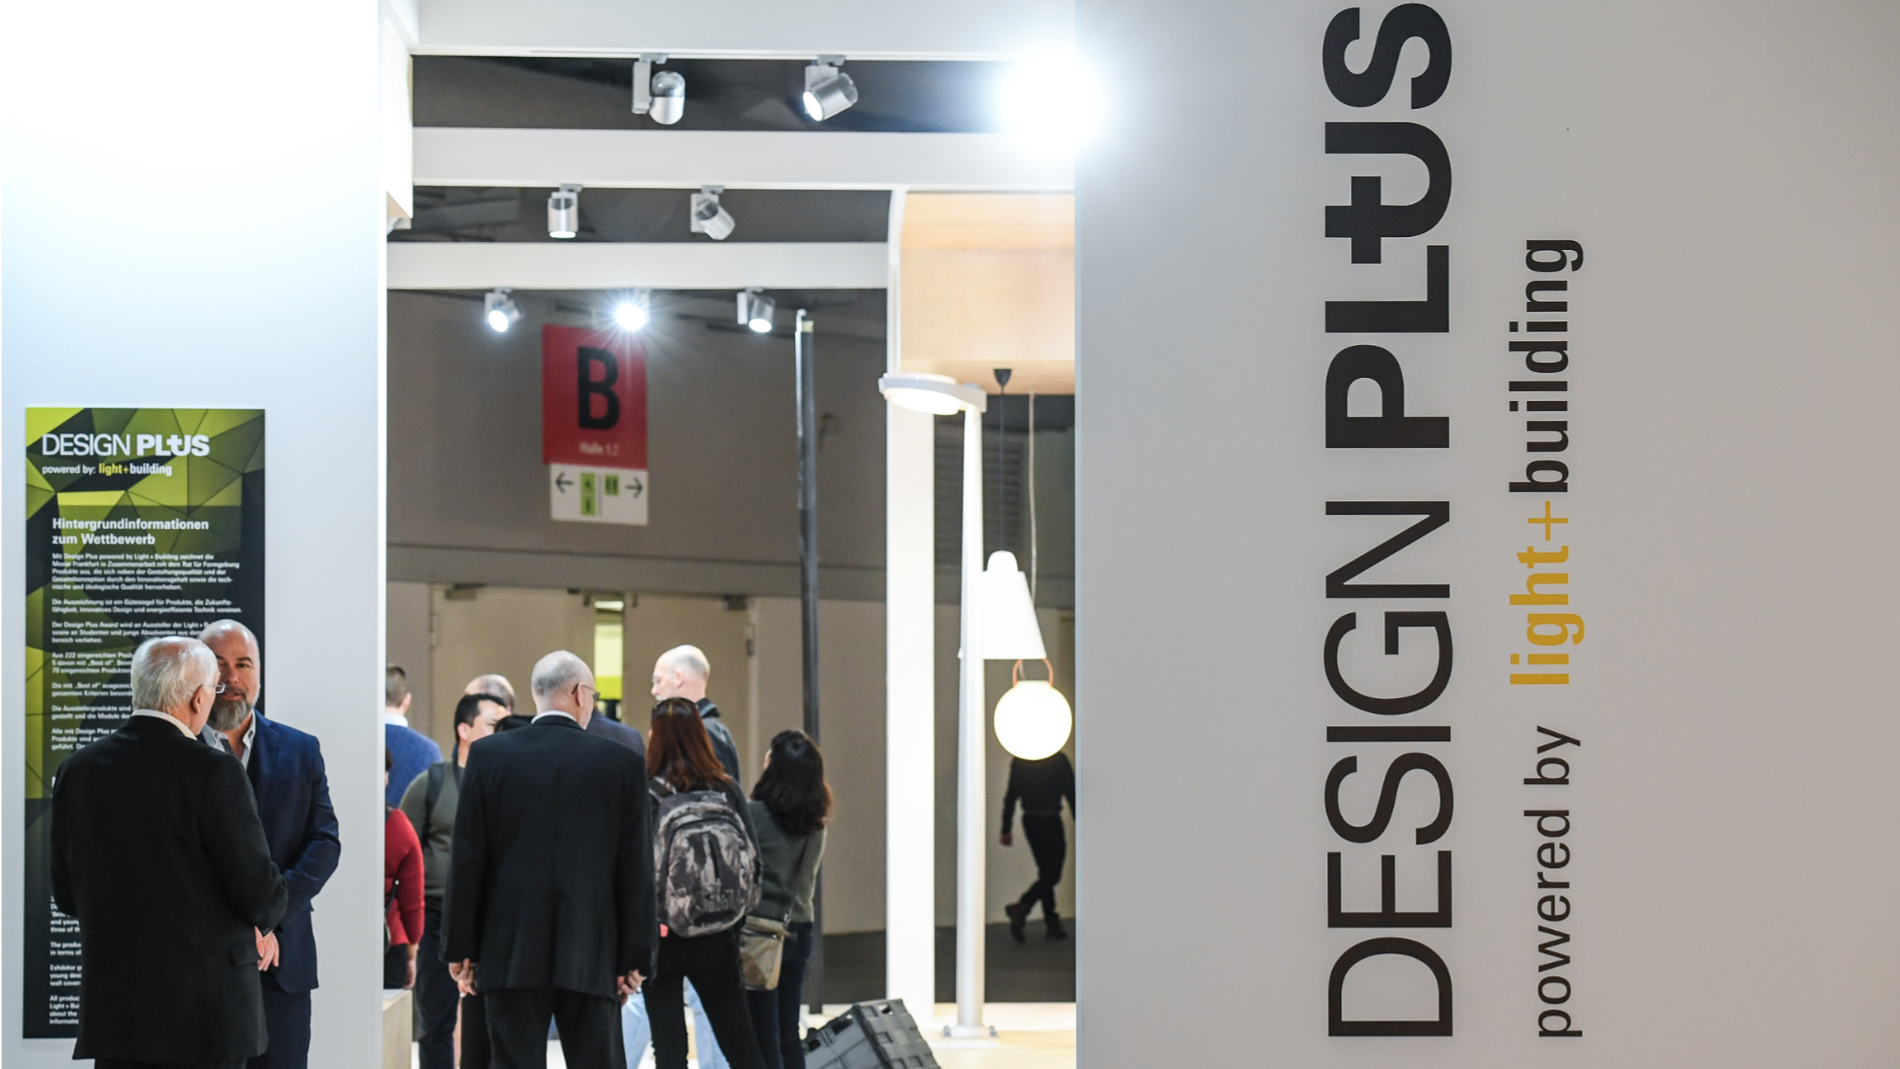 Orientation in the variety of innovations is provided by special presentations such as the exhibition of Design Plus winners in Hall 3.1. (Source: Messe Frankfurt Exhibition GmbH)